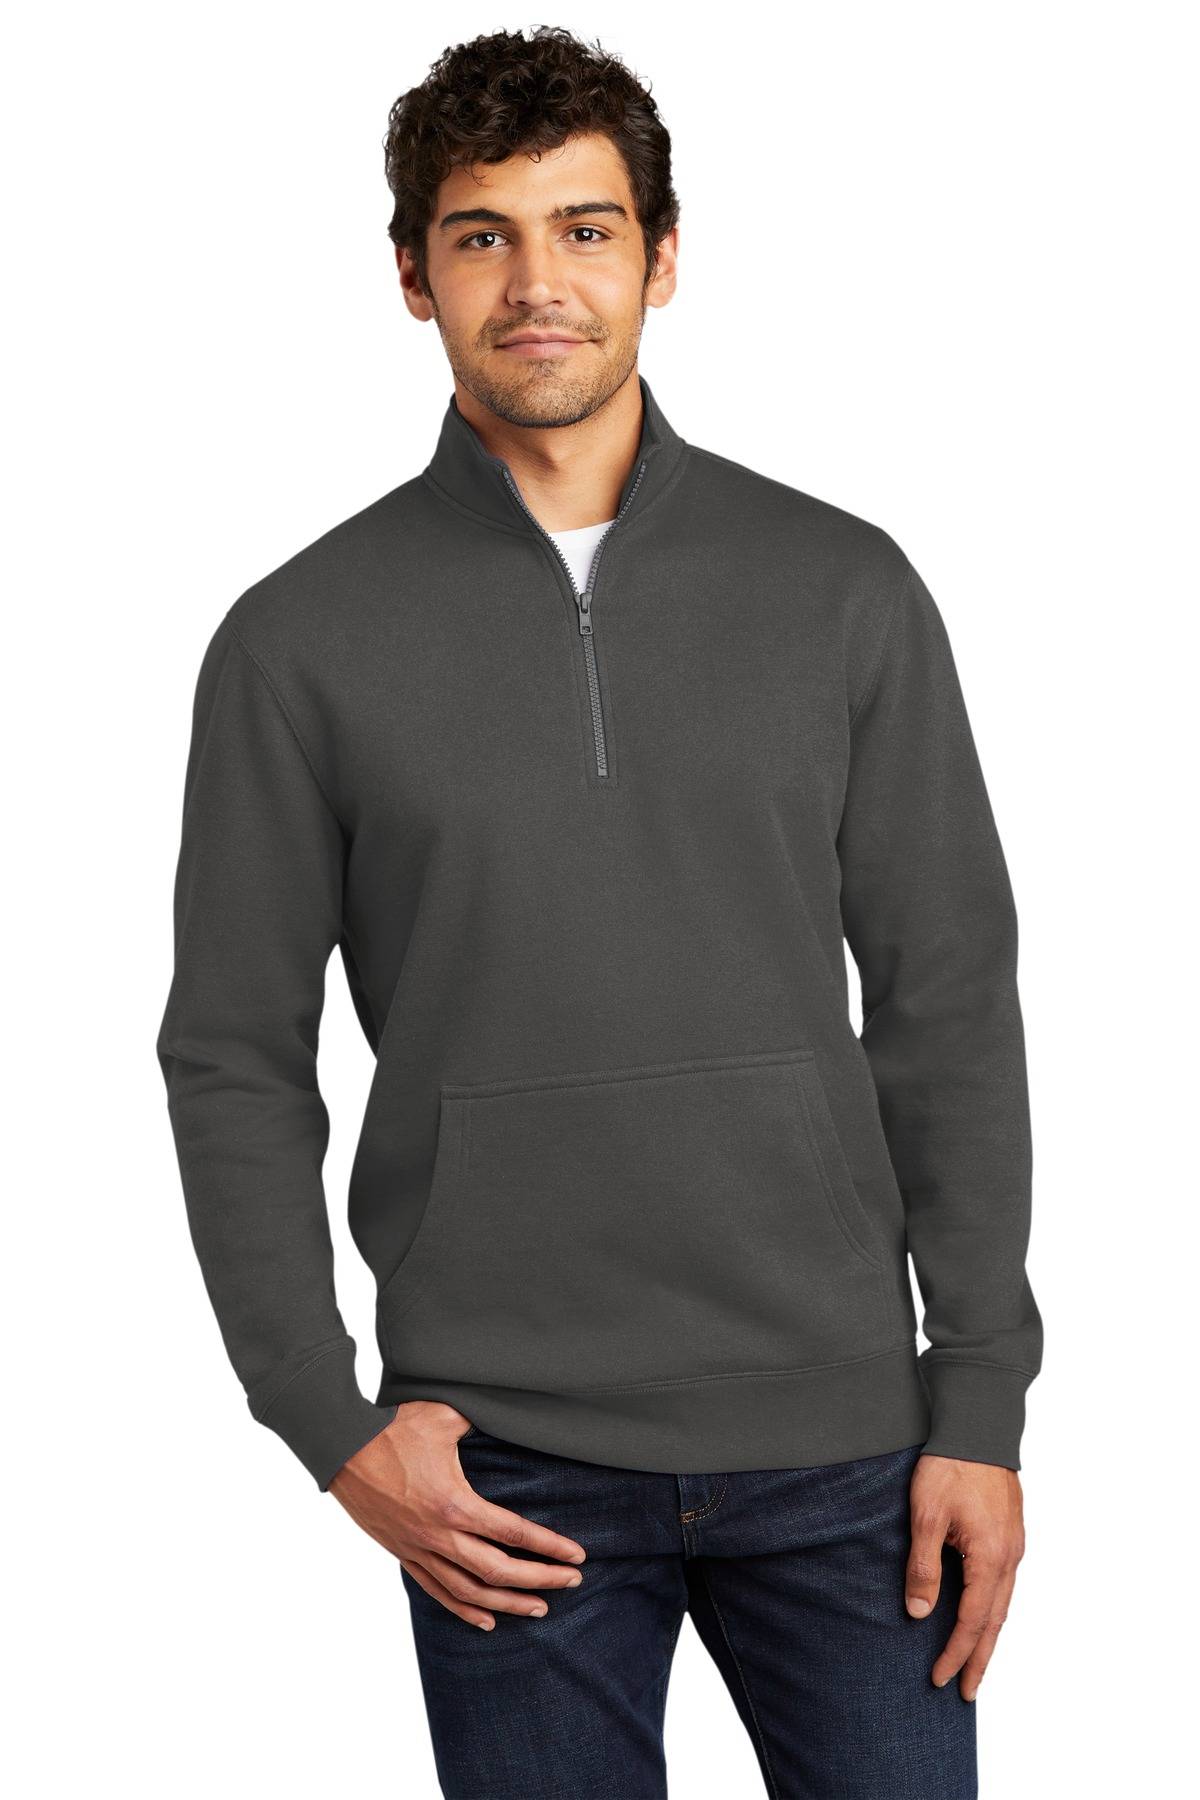 District DT6106 Mens Long Sleeve VIT Fleece 1/4 Zip Pullover With Pockets